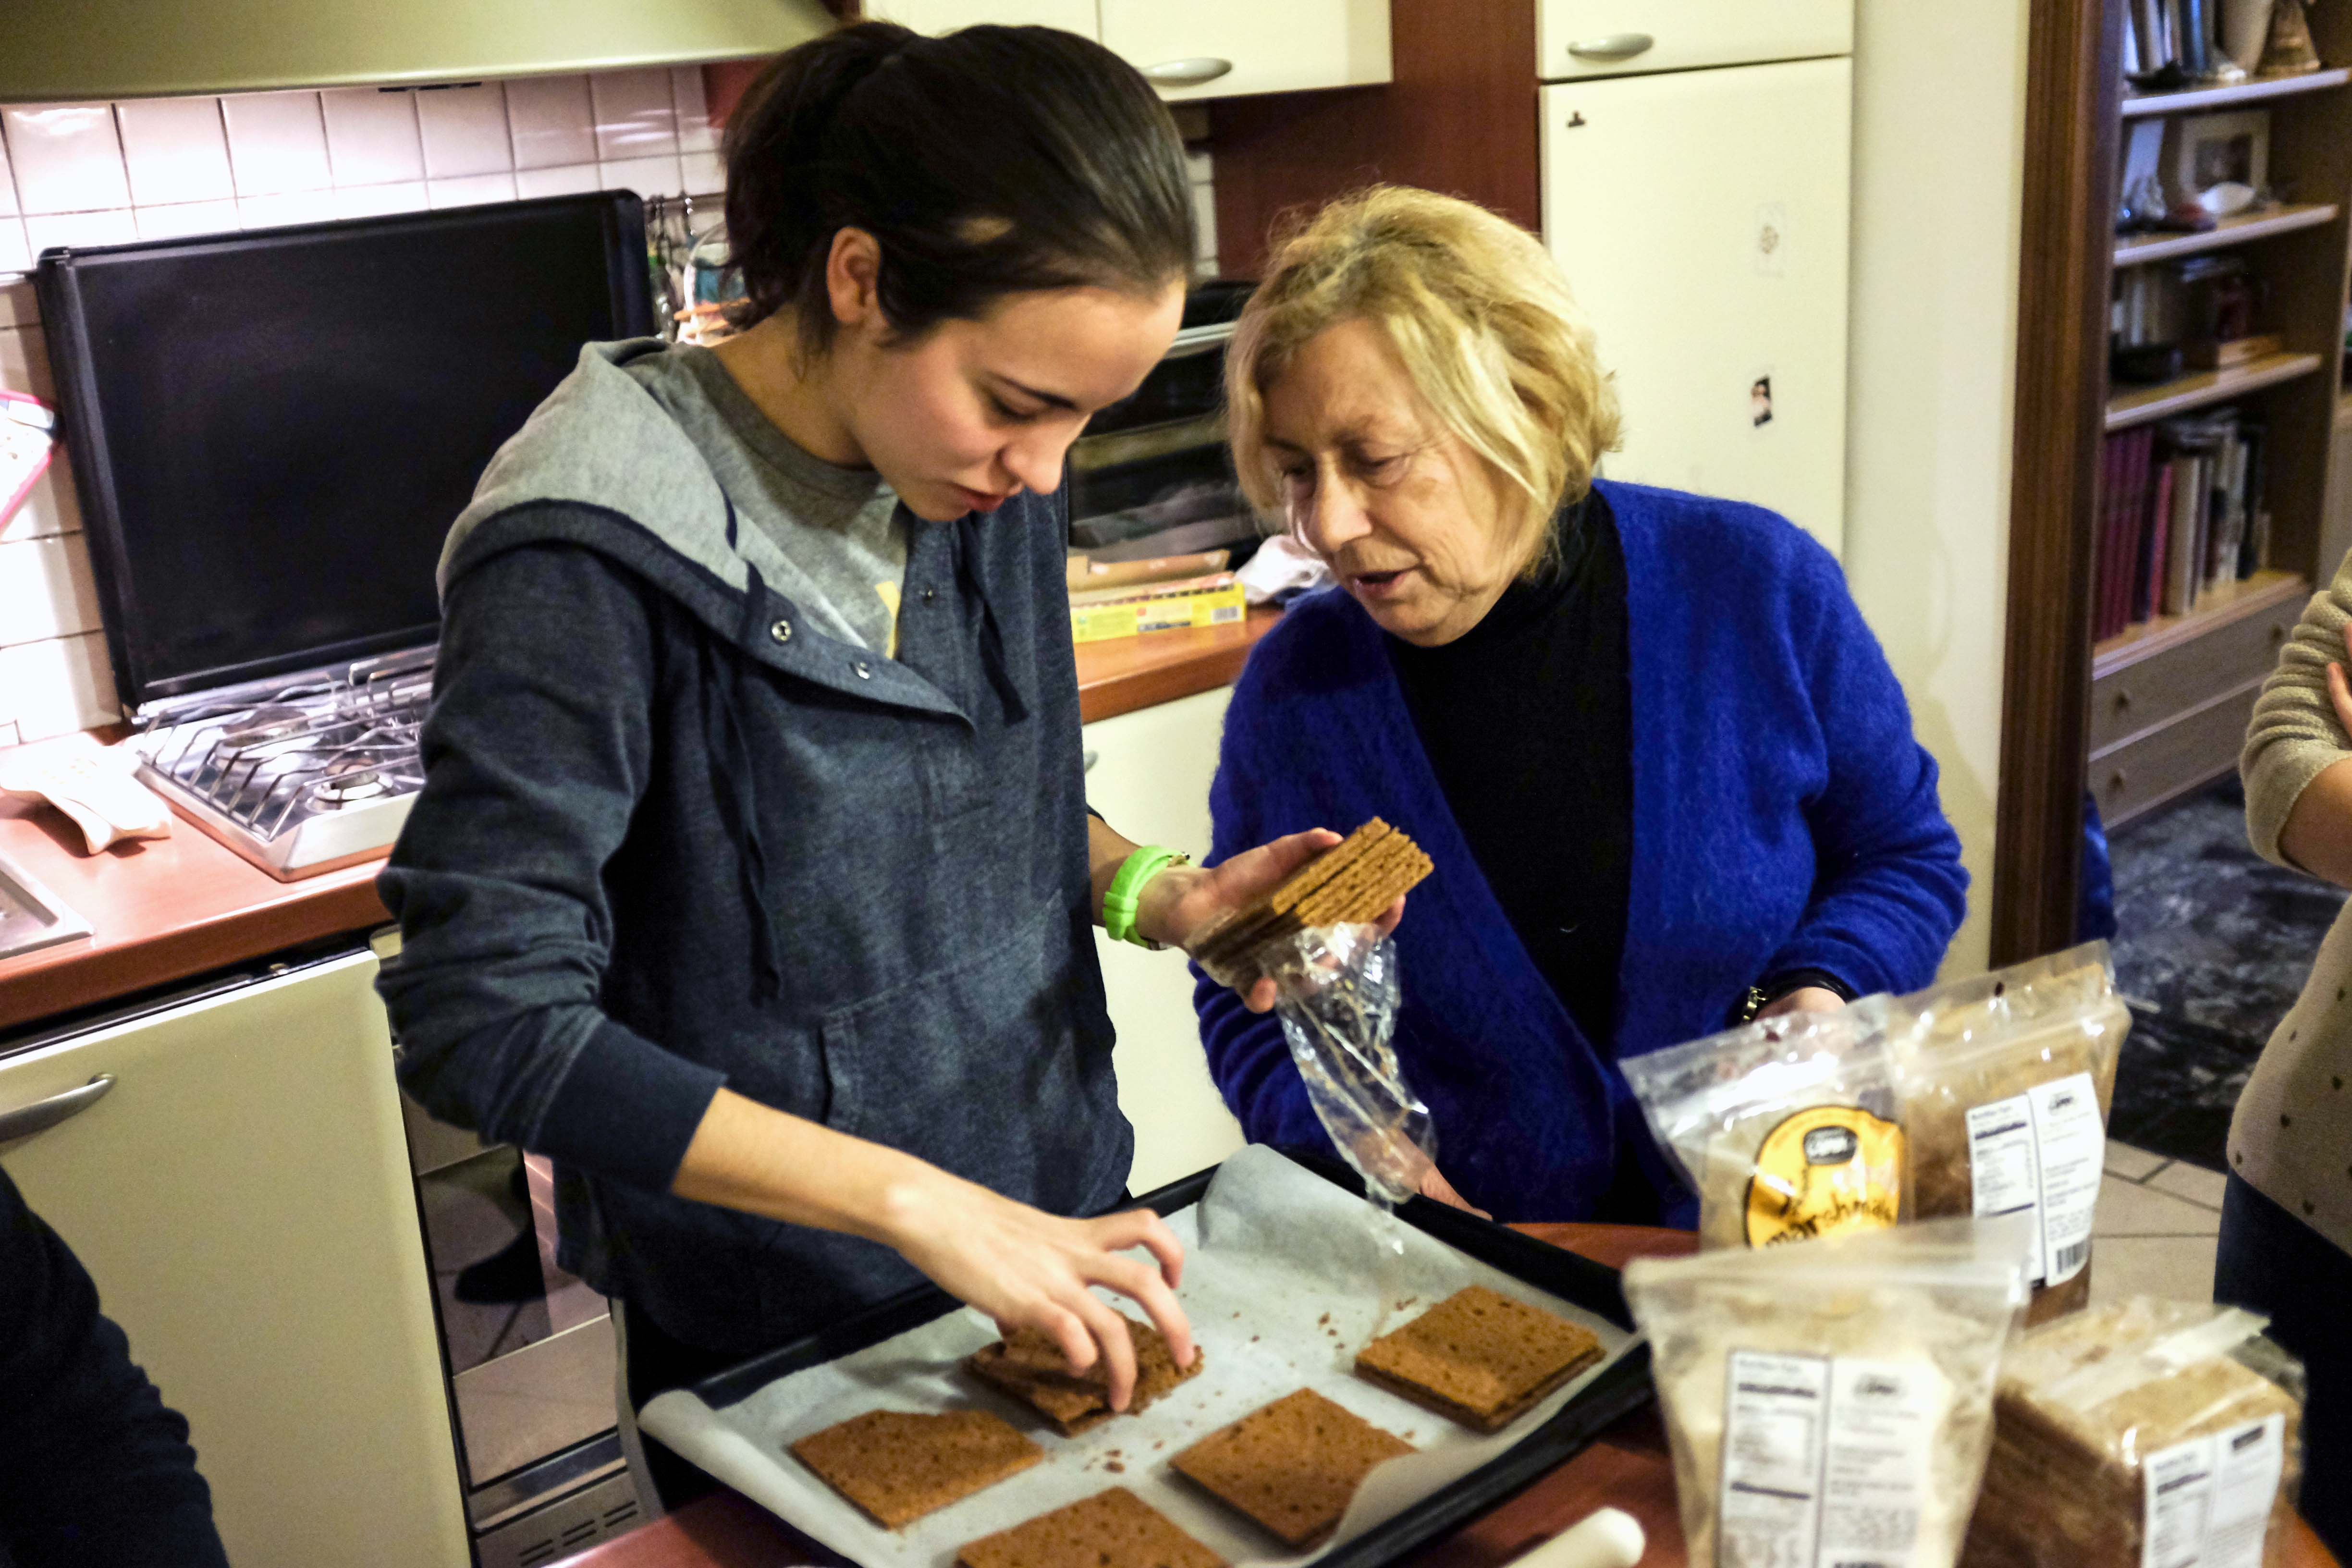 A student learning to bake from her host mom in Reggio Emilia, Italy.